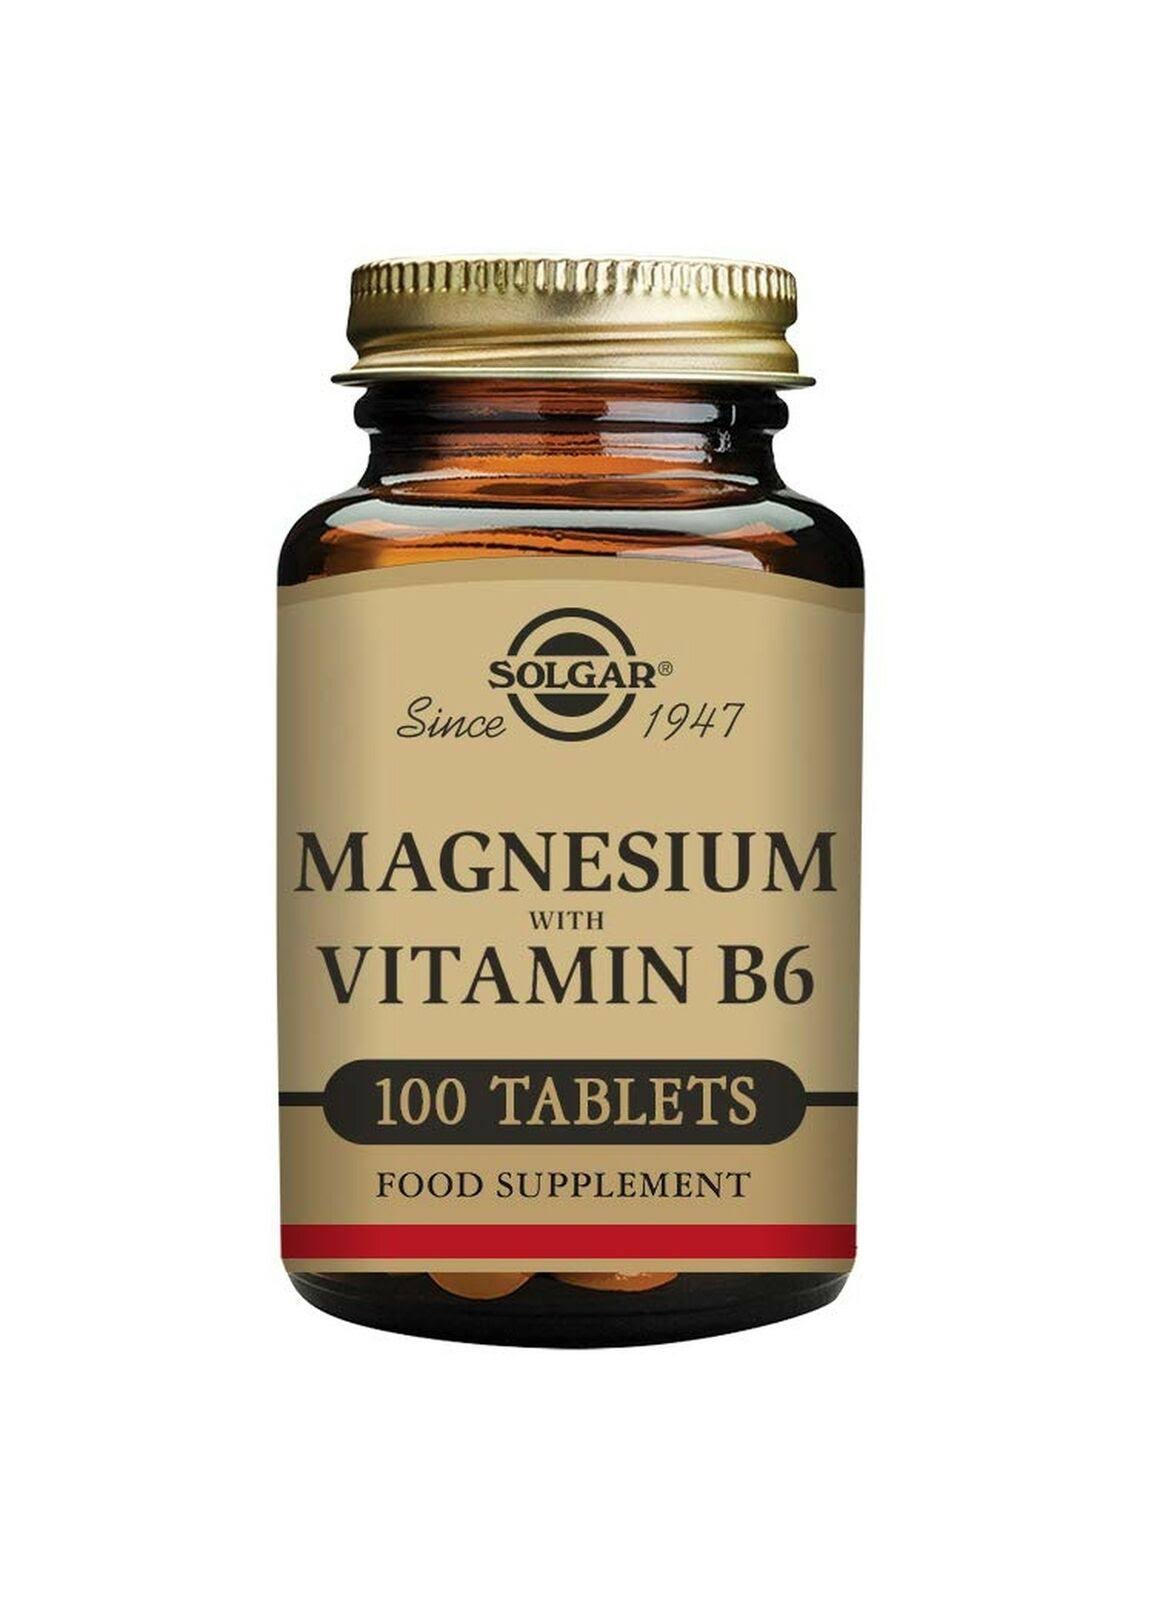 Solgar Magnesium with Vitamin B6 Dietary Supplement - 100 Tablets